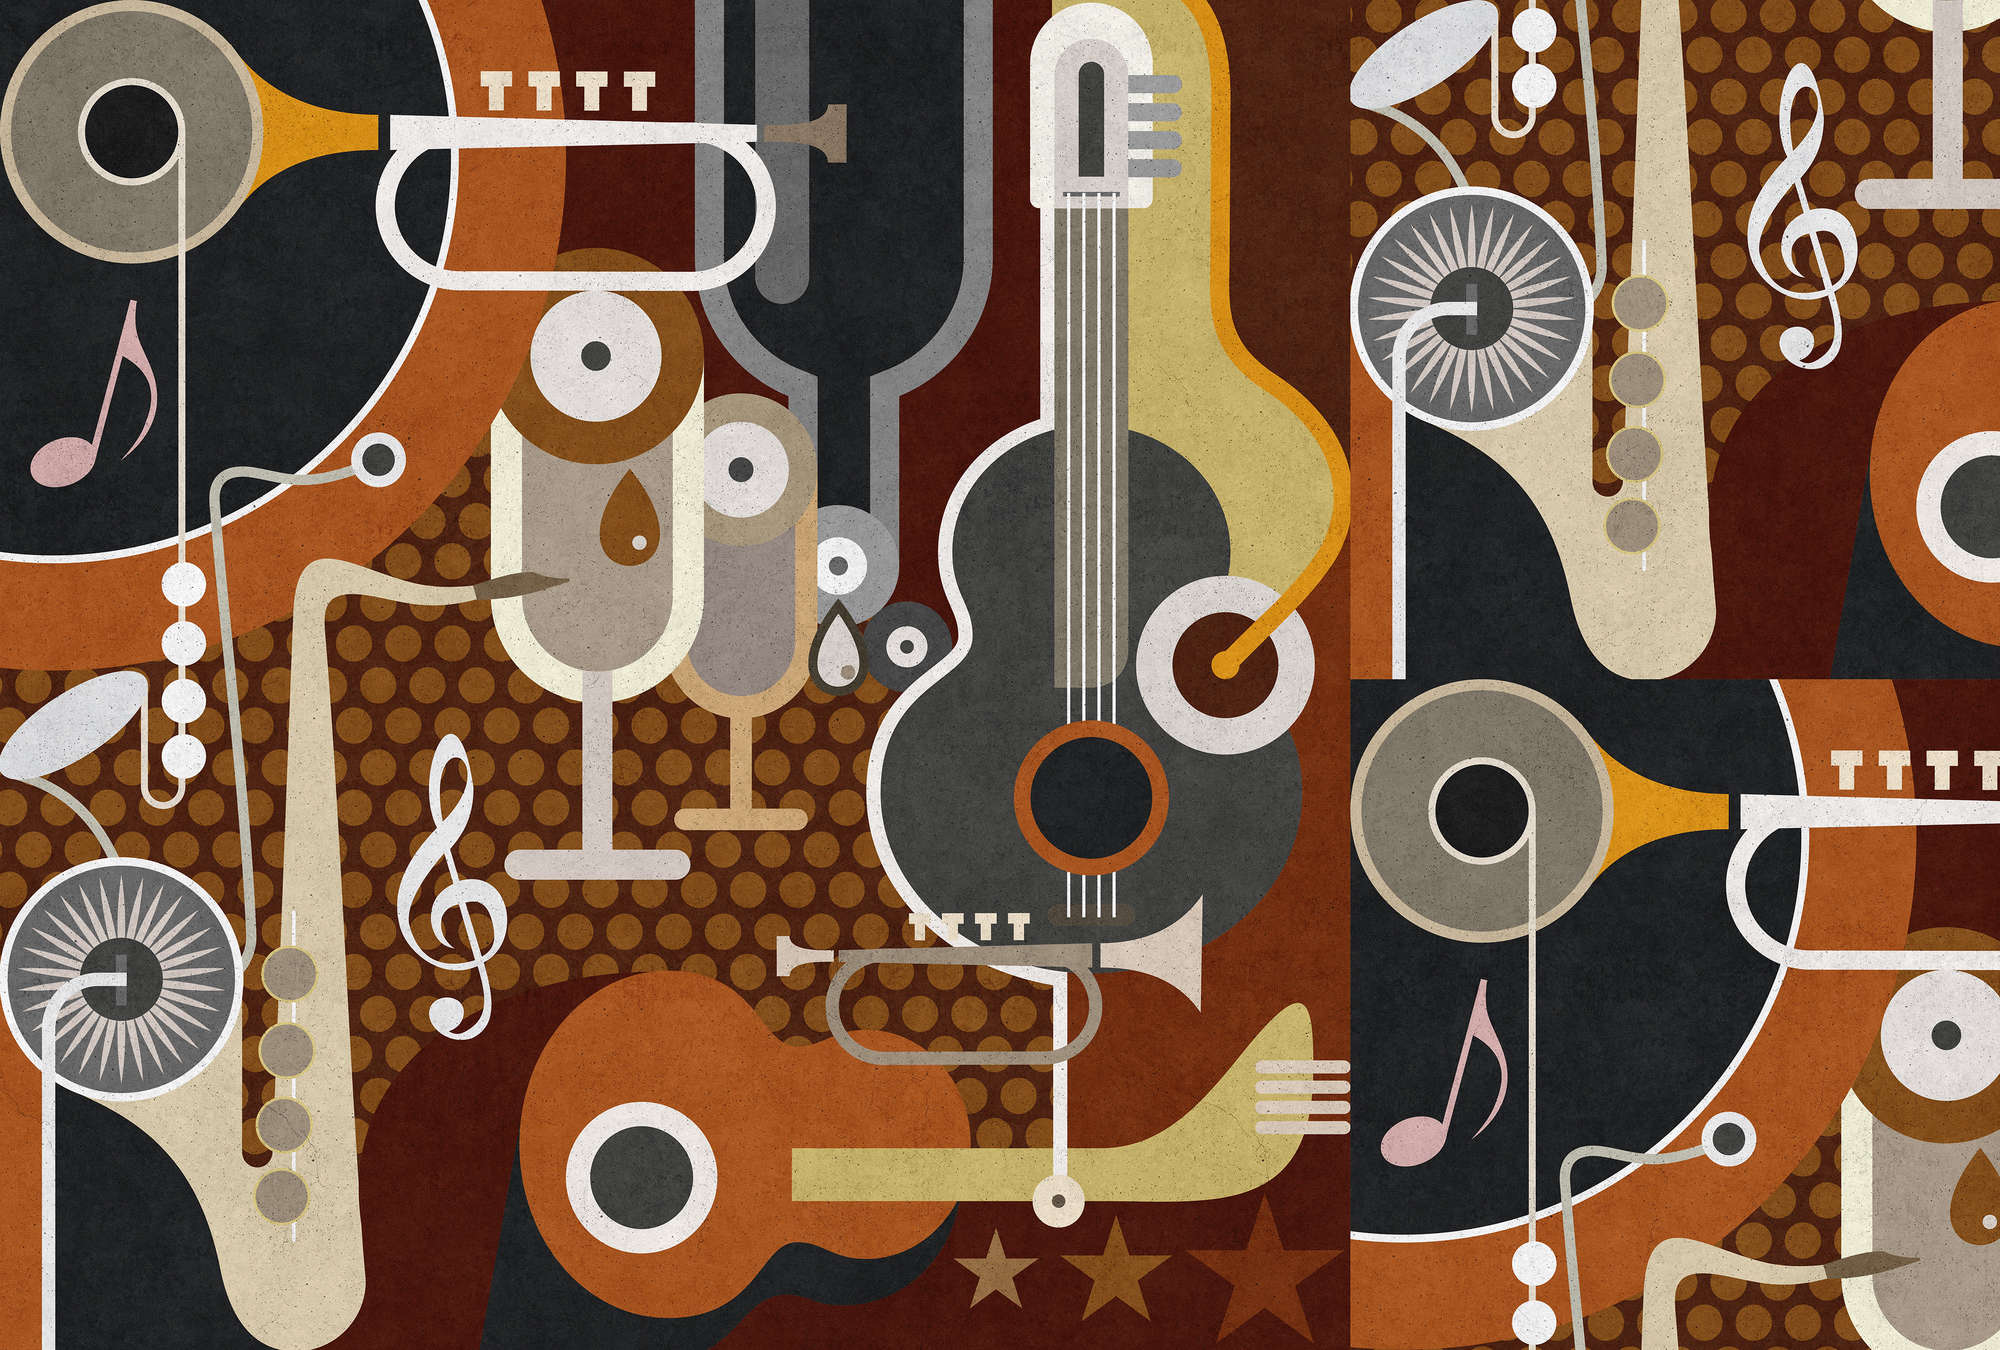             Wall of sound 1 - Wallpaper in concrete structure, abstract musical instruments - Beige, Brown | Pearl smooth non-woven
        